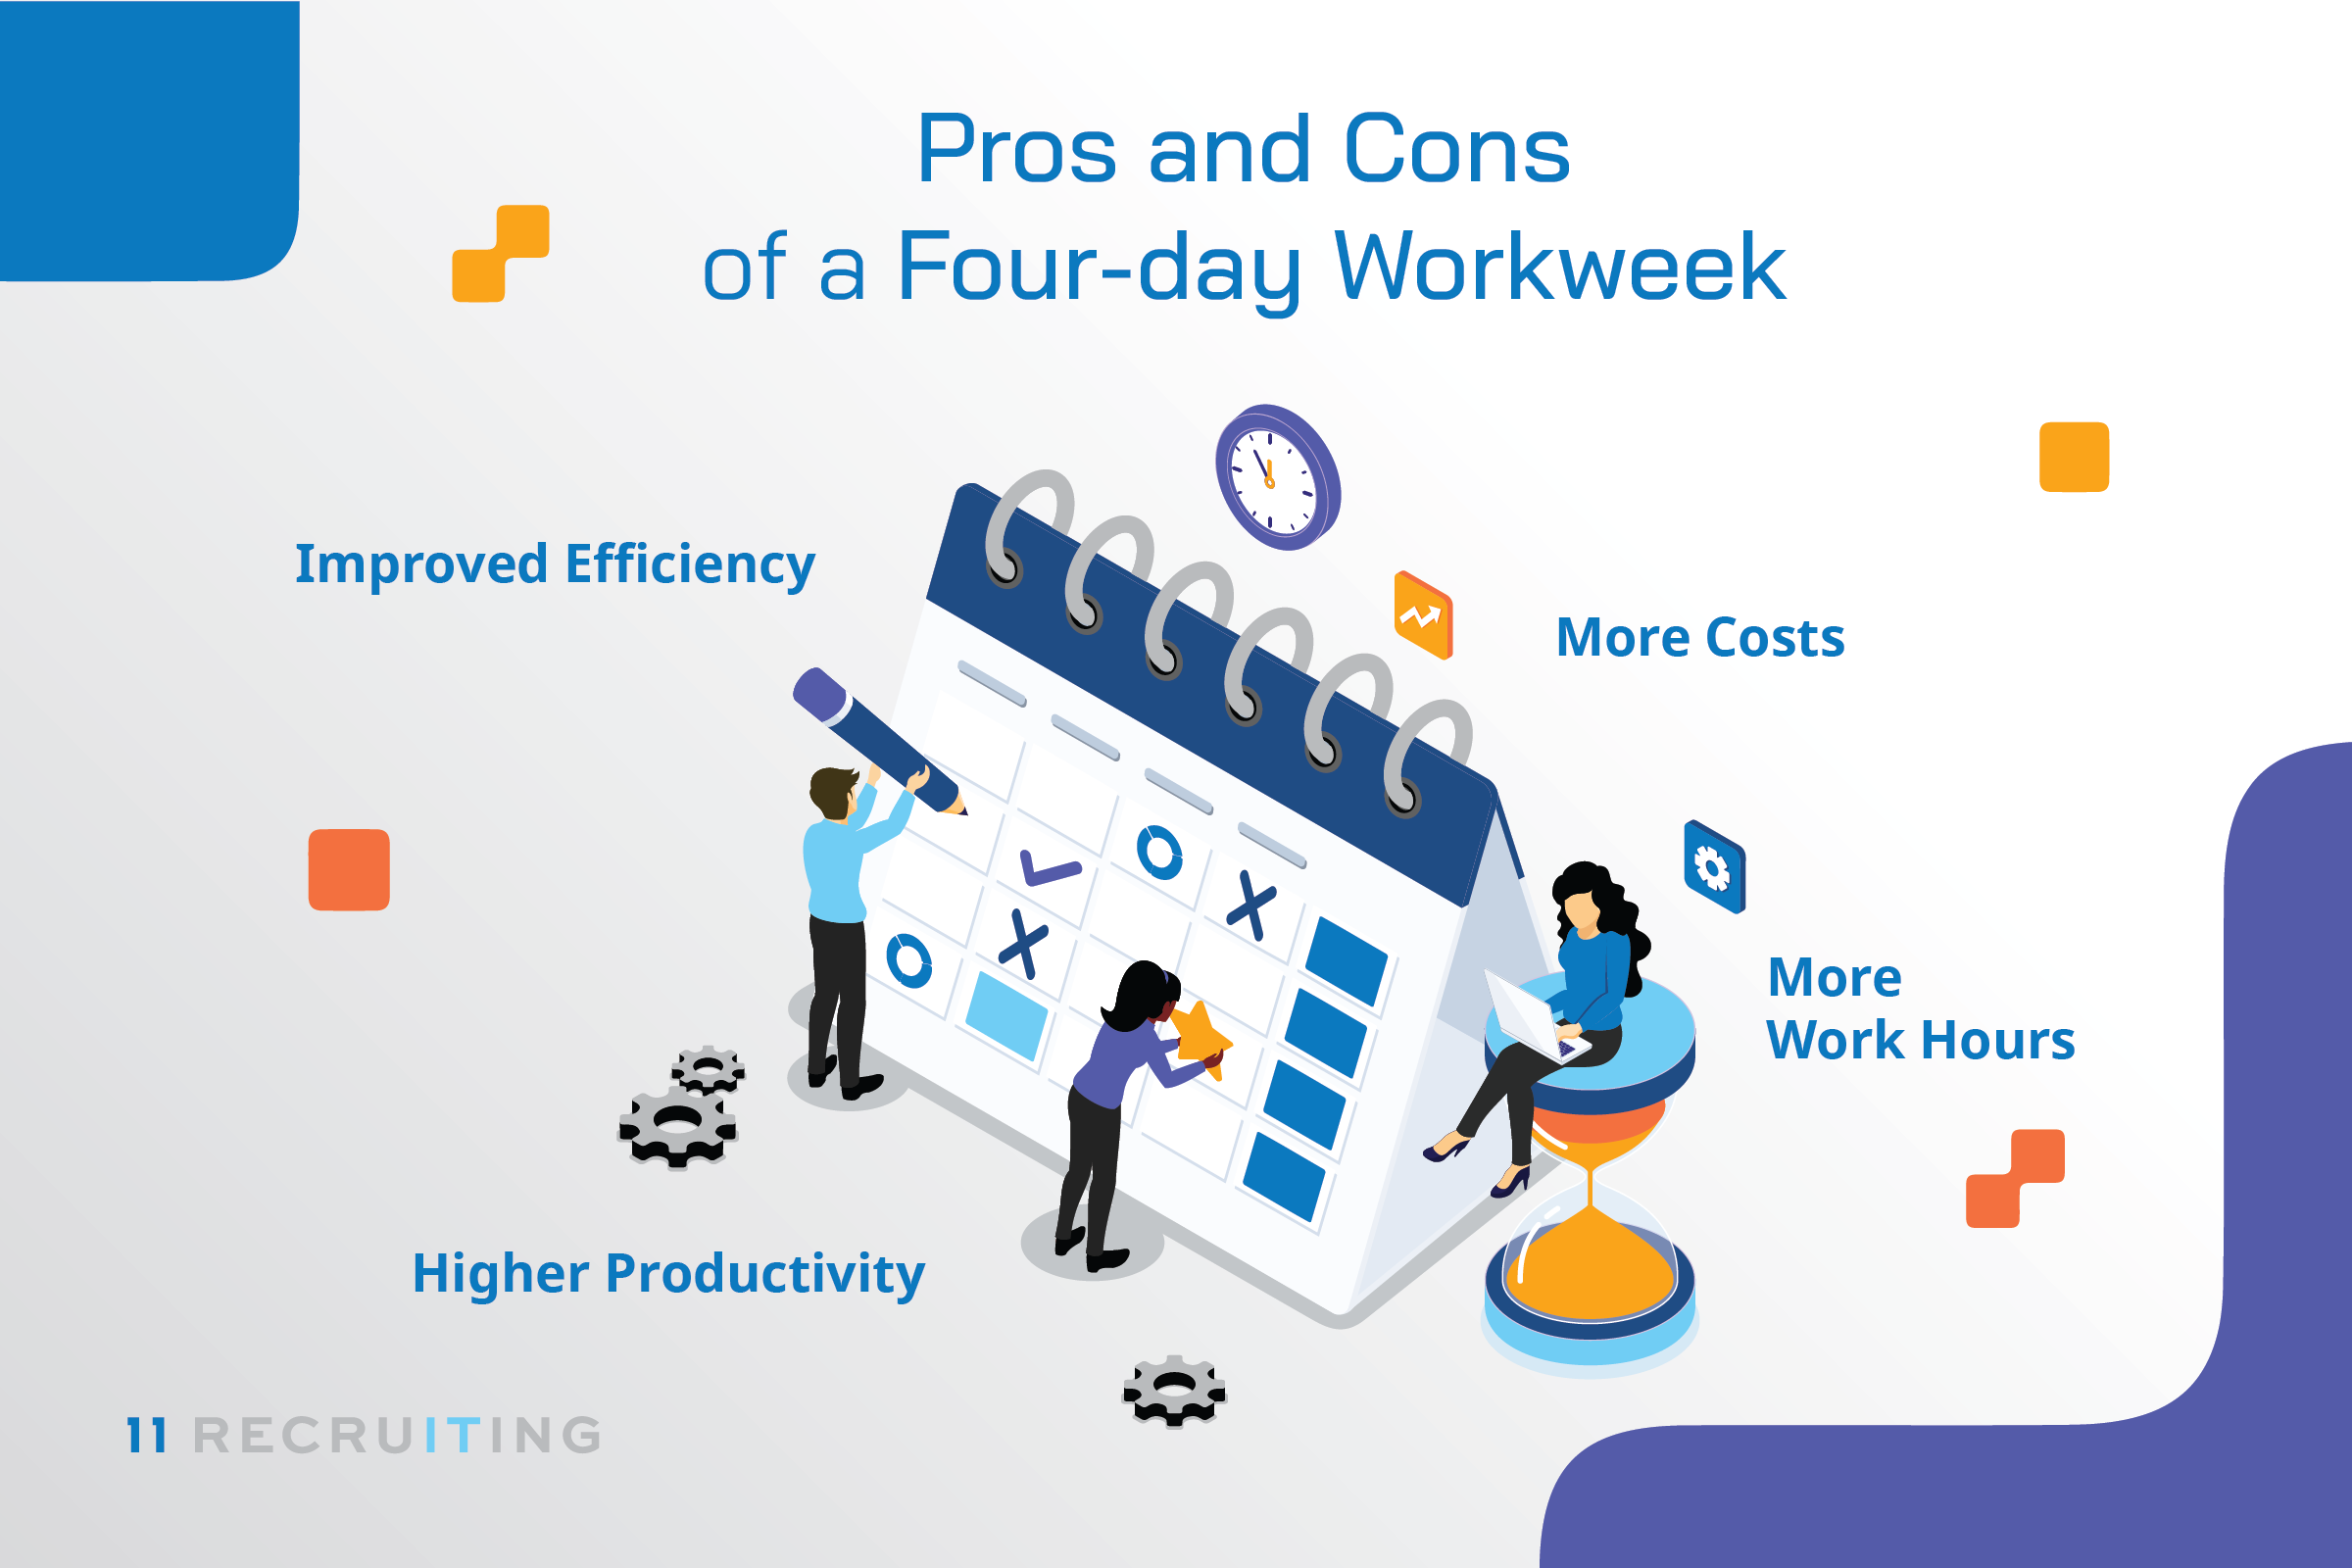 Pros and Cons of a Four-day Workweek